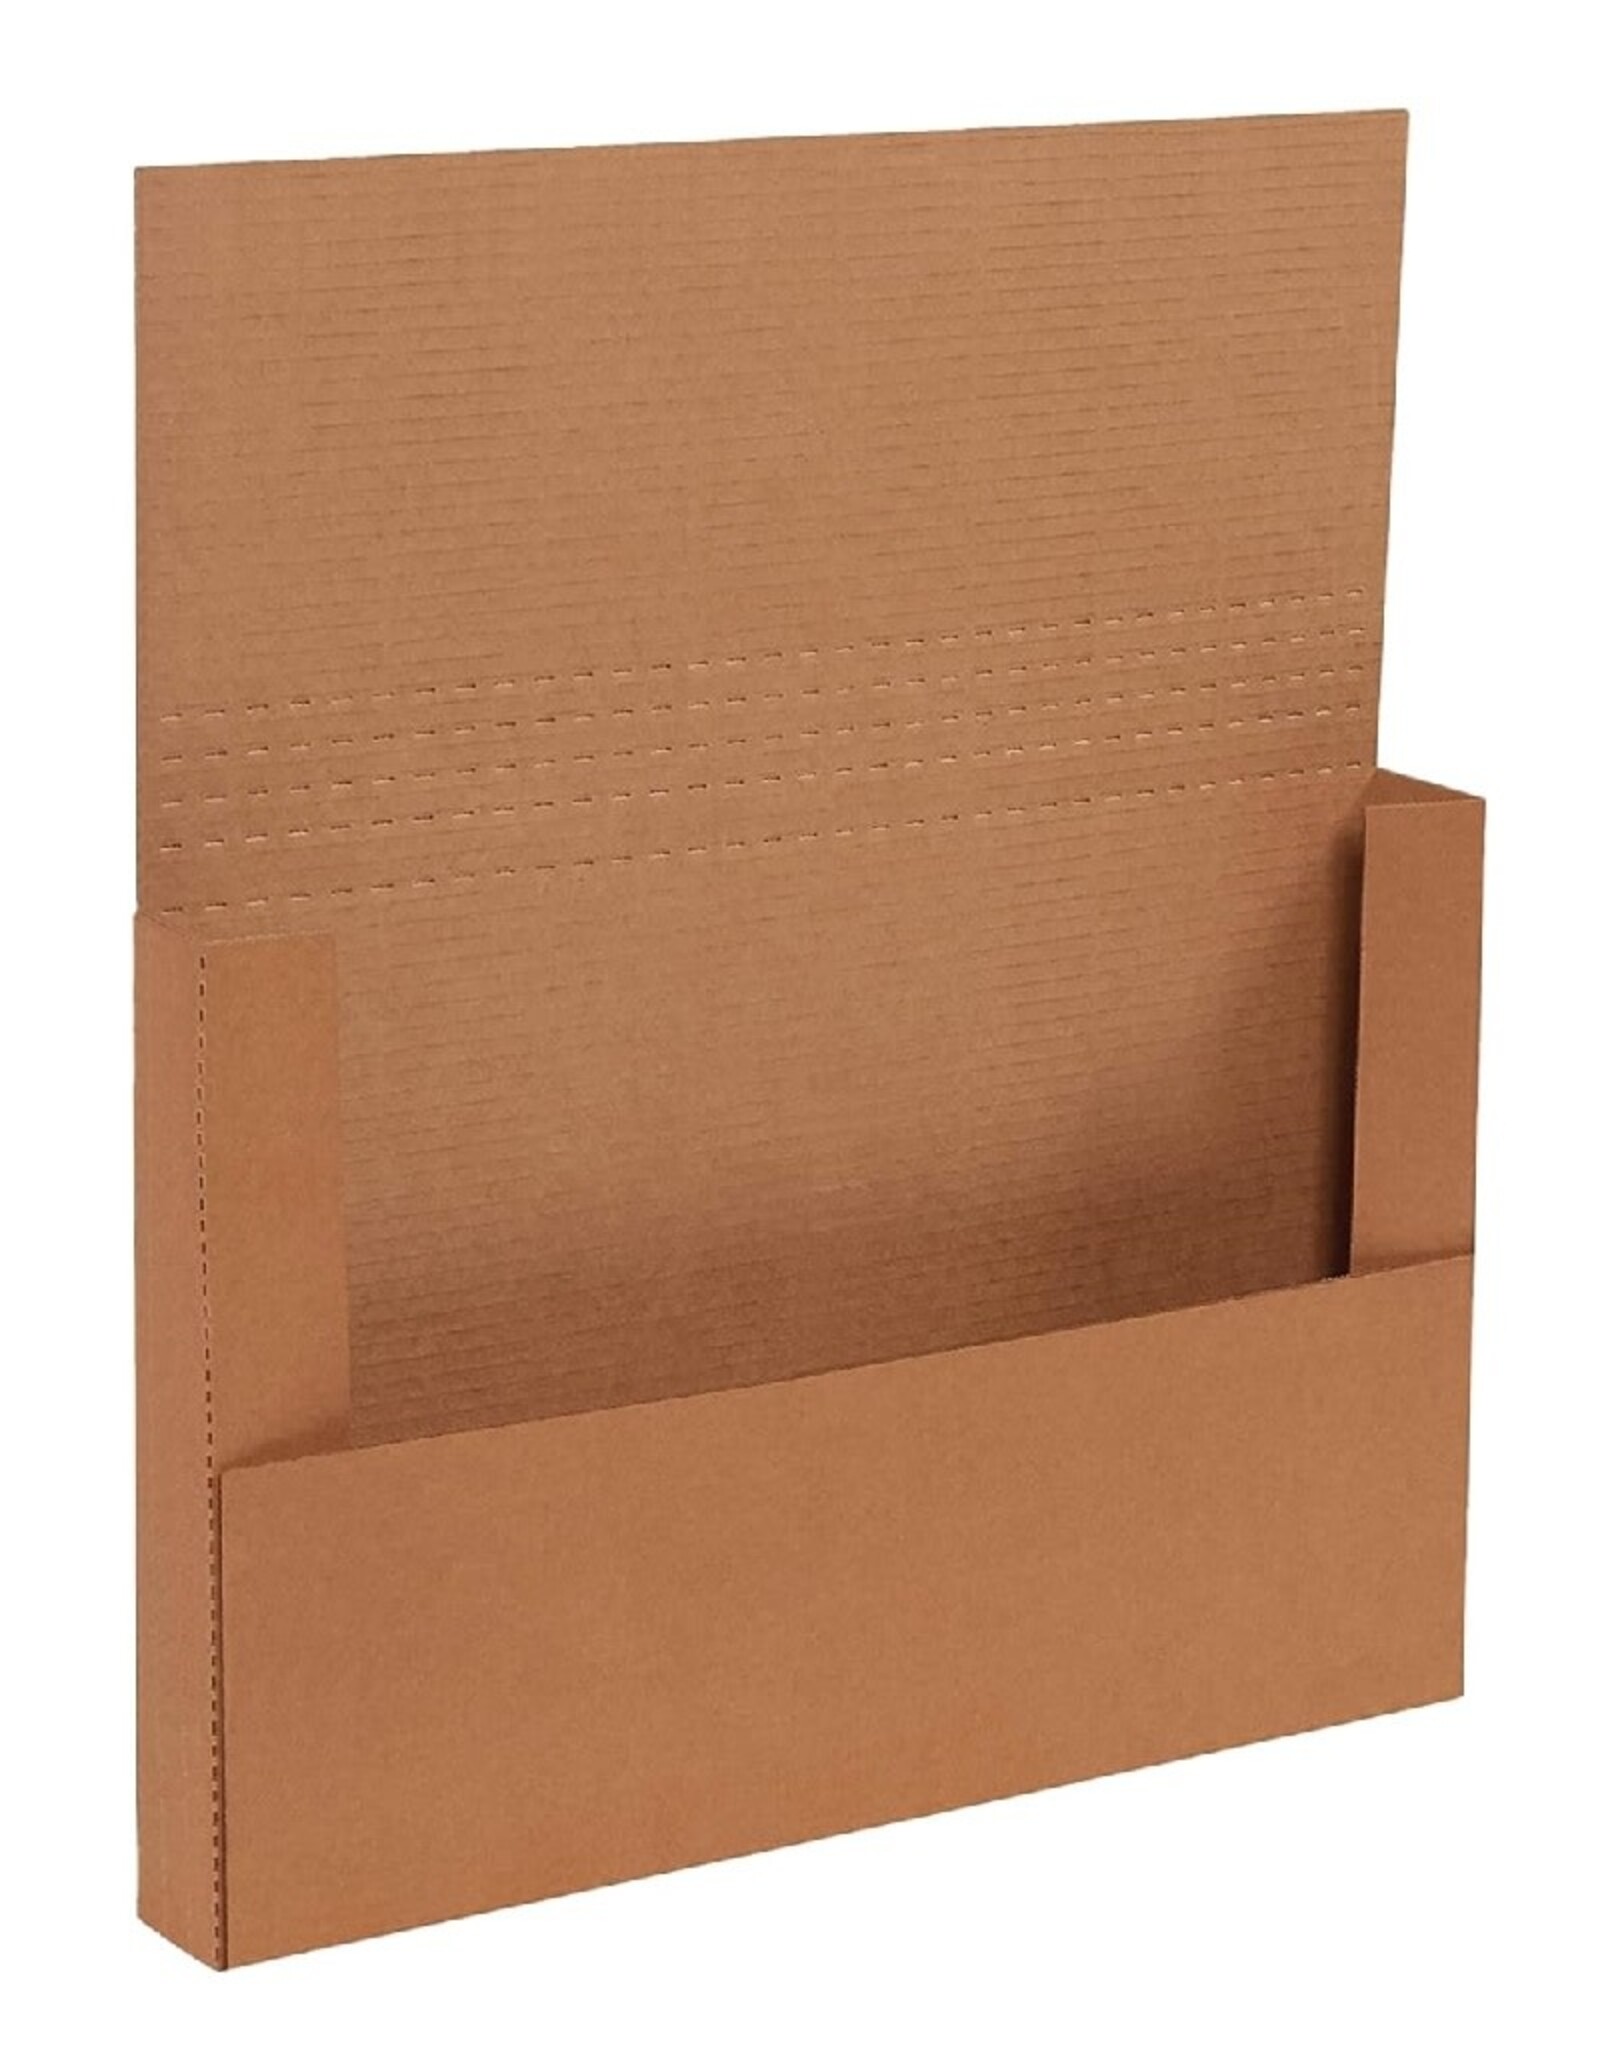 single - Small Shipping Boxes 18"L x 12"W x 2"H, 50-Pack | 18x12x2 | 18122 |